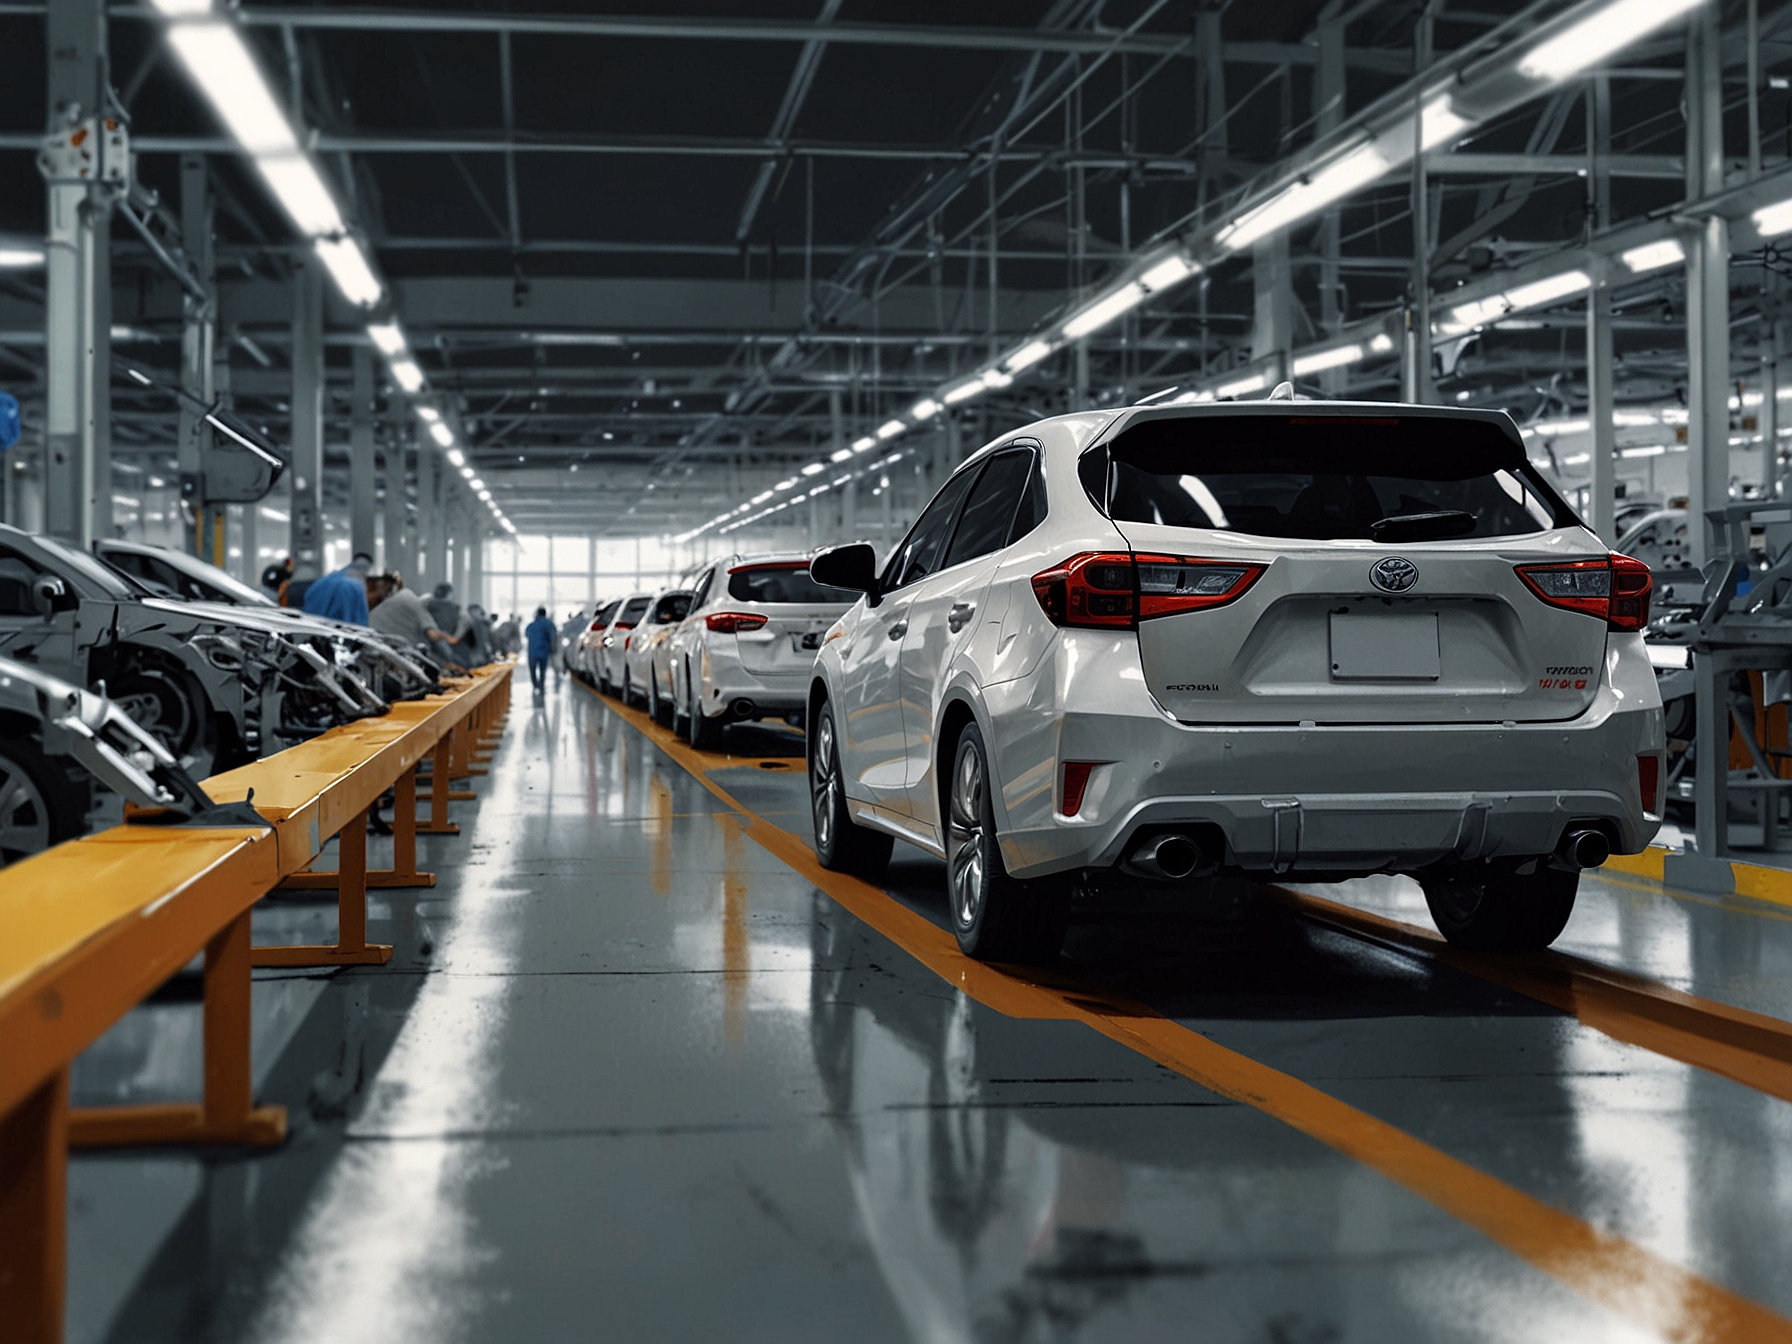 An image of a Toyota production line where various car models are being assembled.